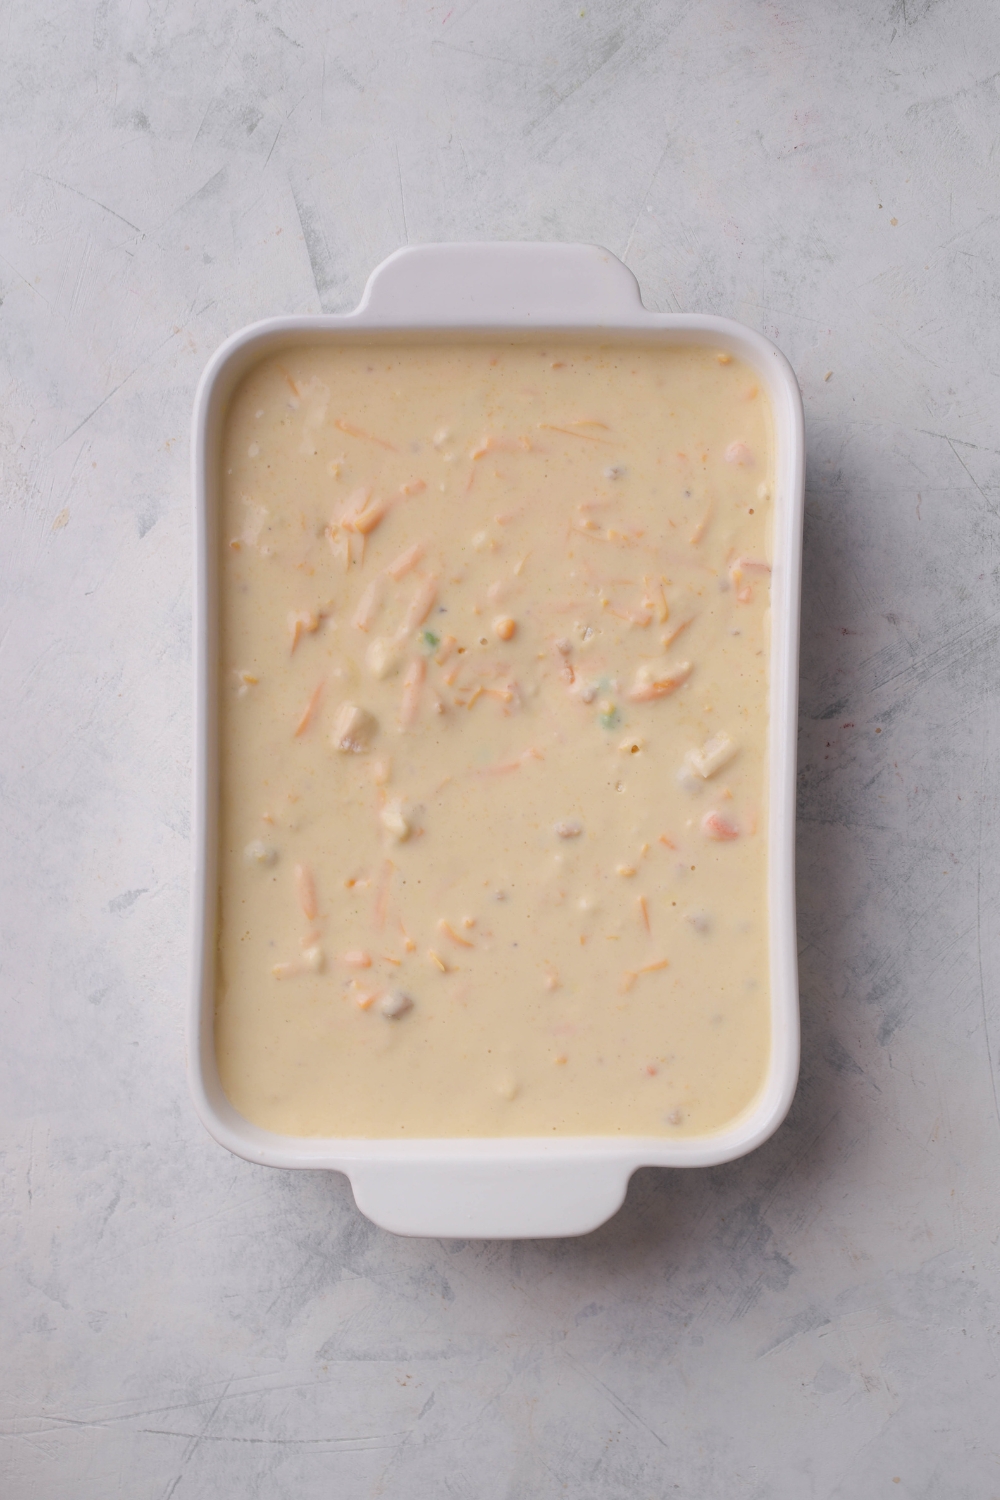 A baking dish filled with a creamy soup mixture and pieces of carrots and peas are visible.